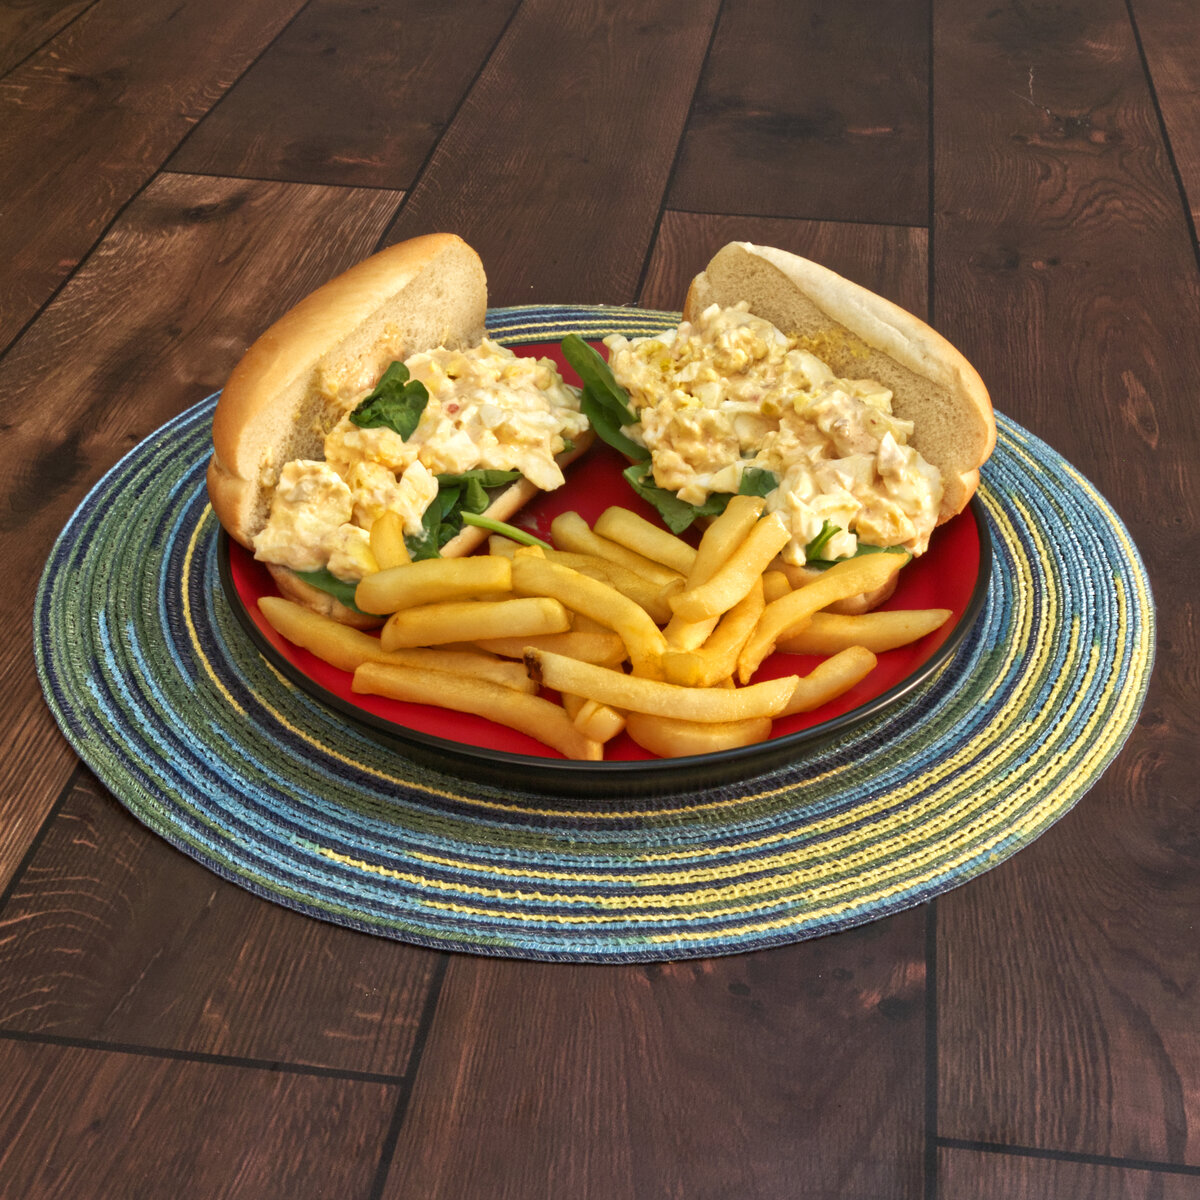 Egg Salad Sandwiches with French Fries